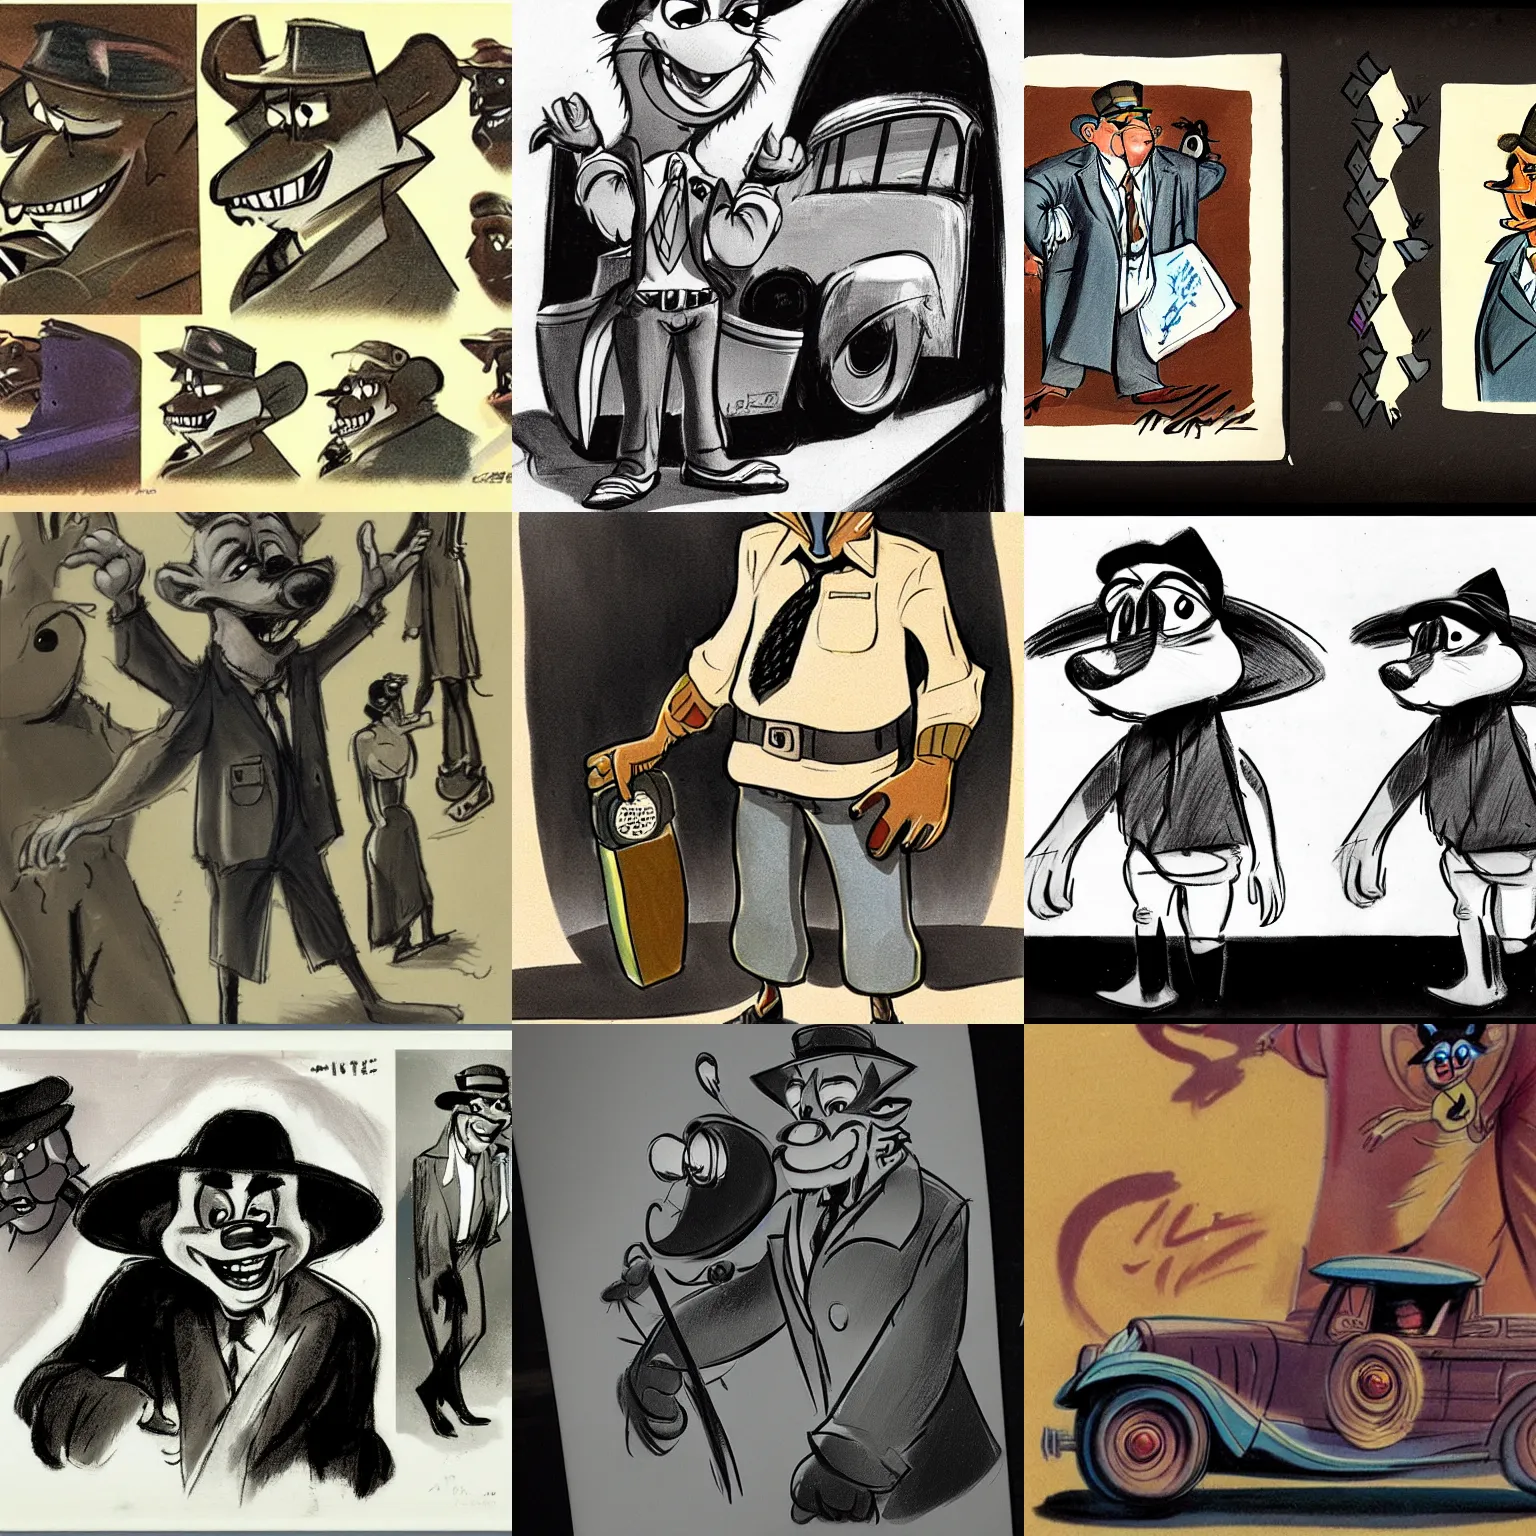 Prompt: character design concept art by Milt Kahl of a raccoon taxi driver from the 1930s